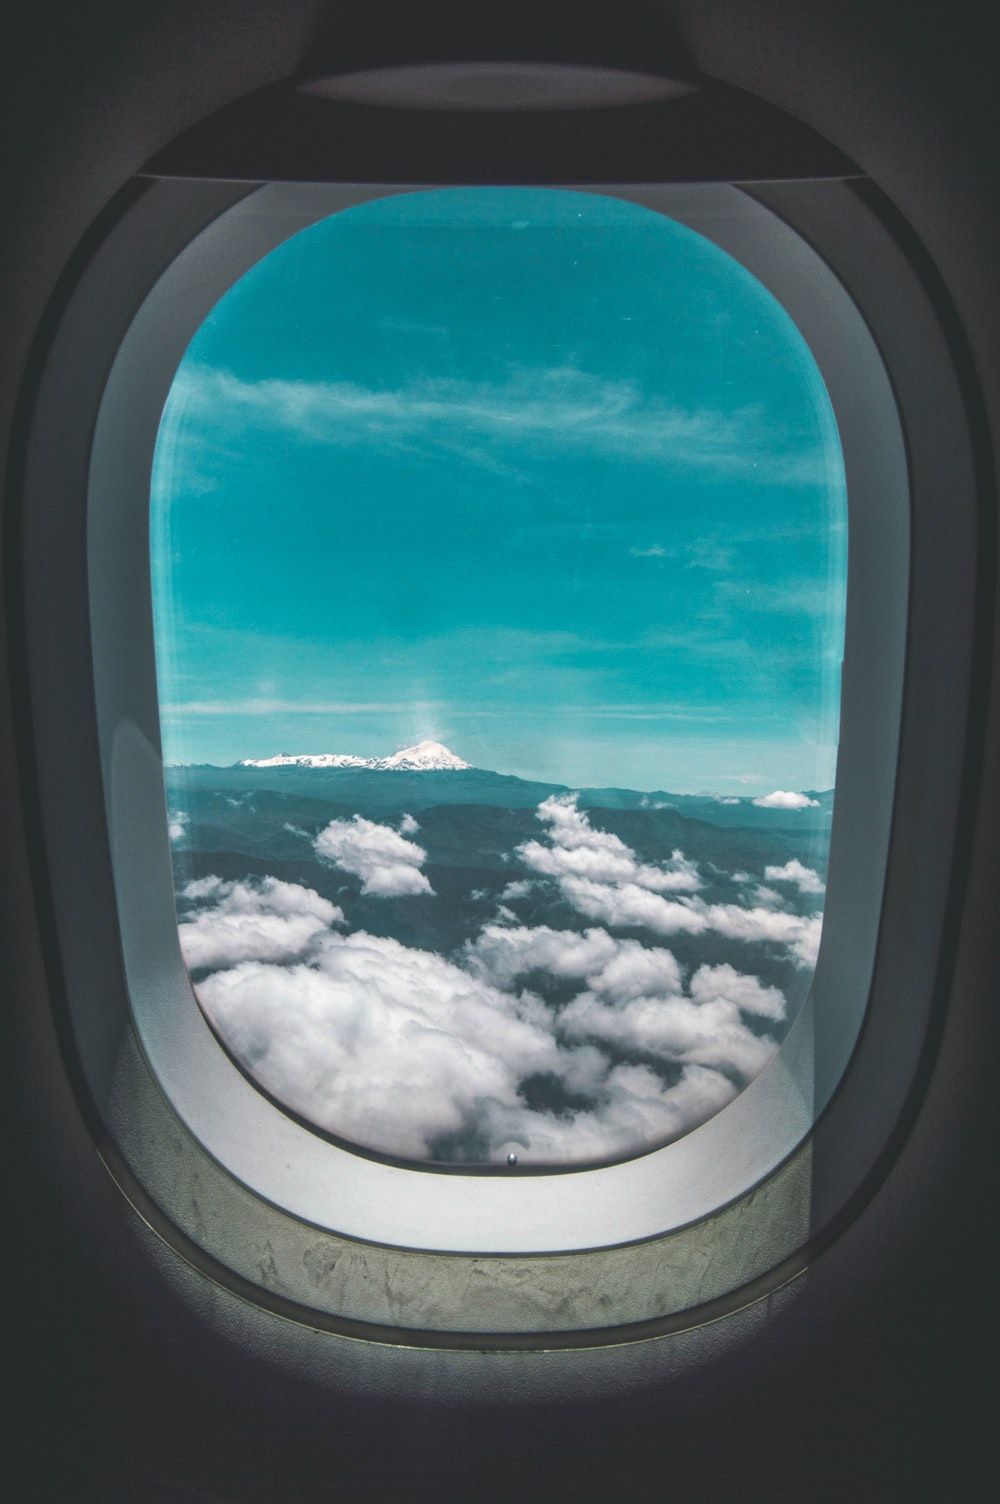 Plane Window Picture. Download Free Image